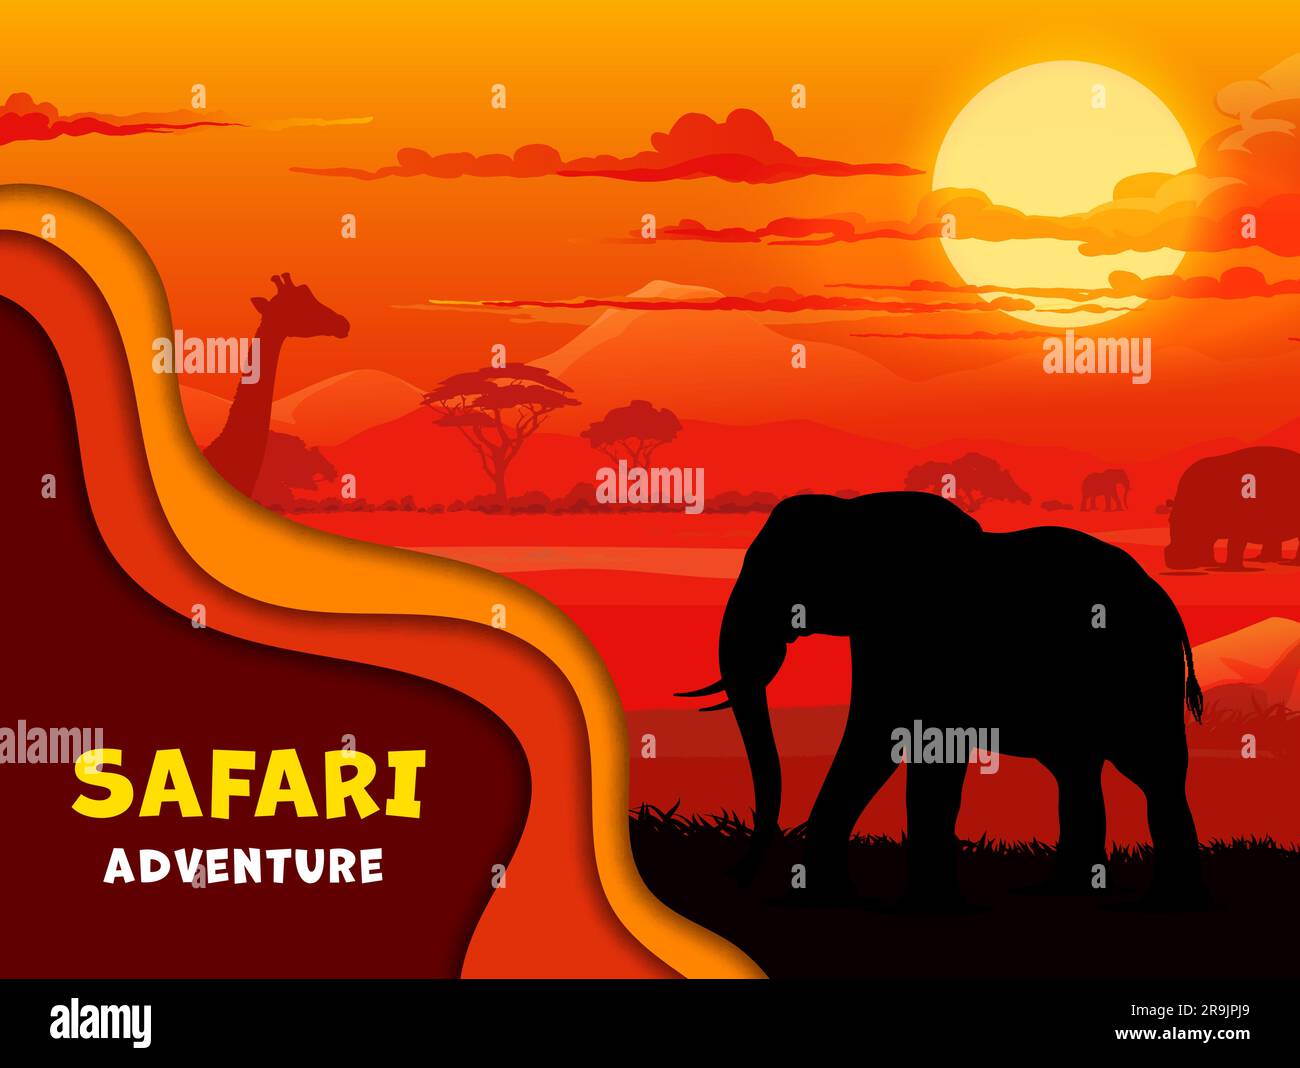 African paper cut banner with safari animals silhouettes on sunset landscape. Scenery savanna nature background with vector elephant, giraffe and hippo, acacia trees, mountains, orange sky and clouds Stock Vector